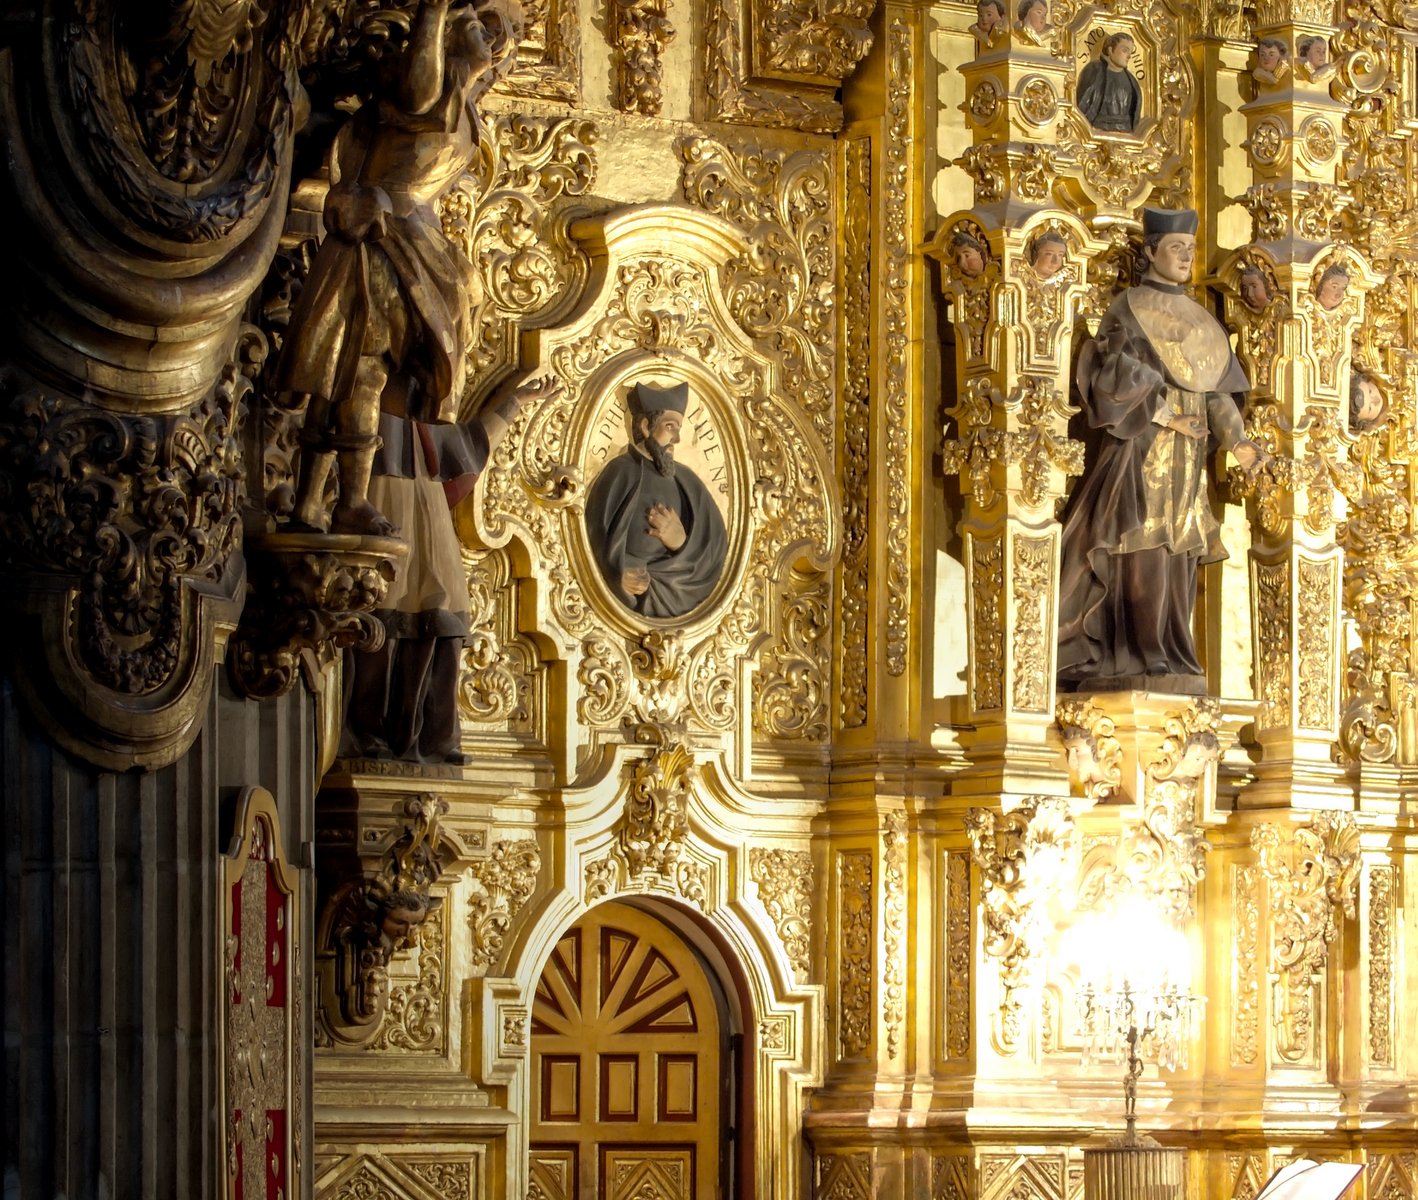 a close - up image of two statues in a golden church